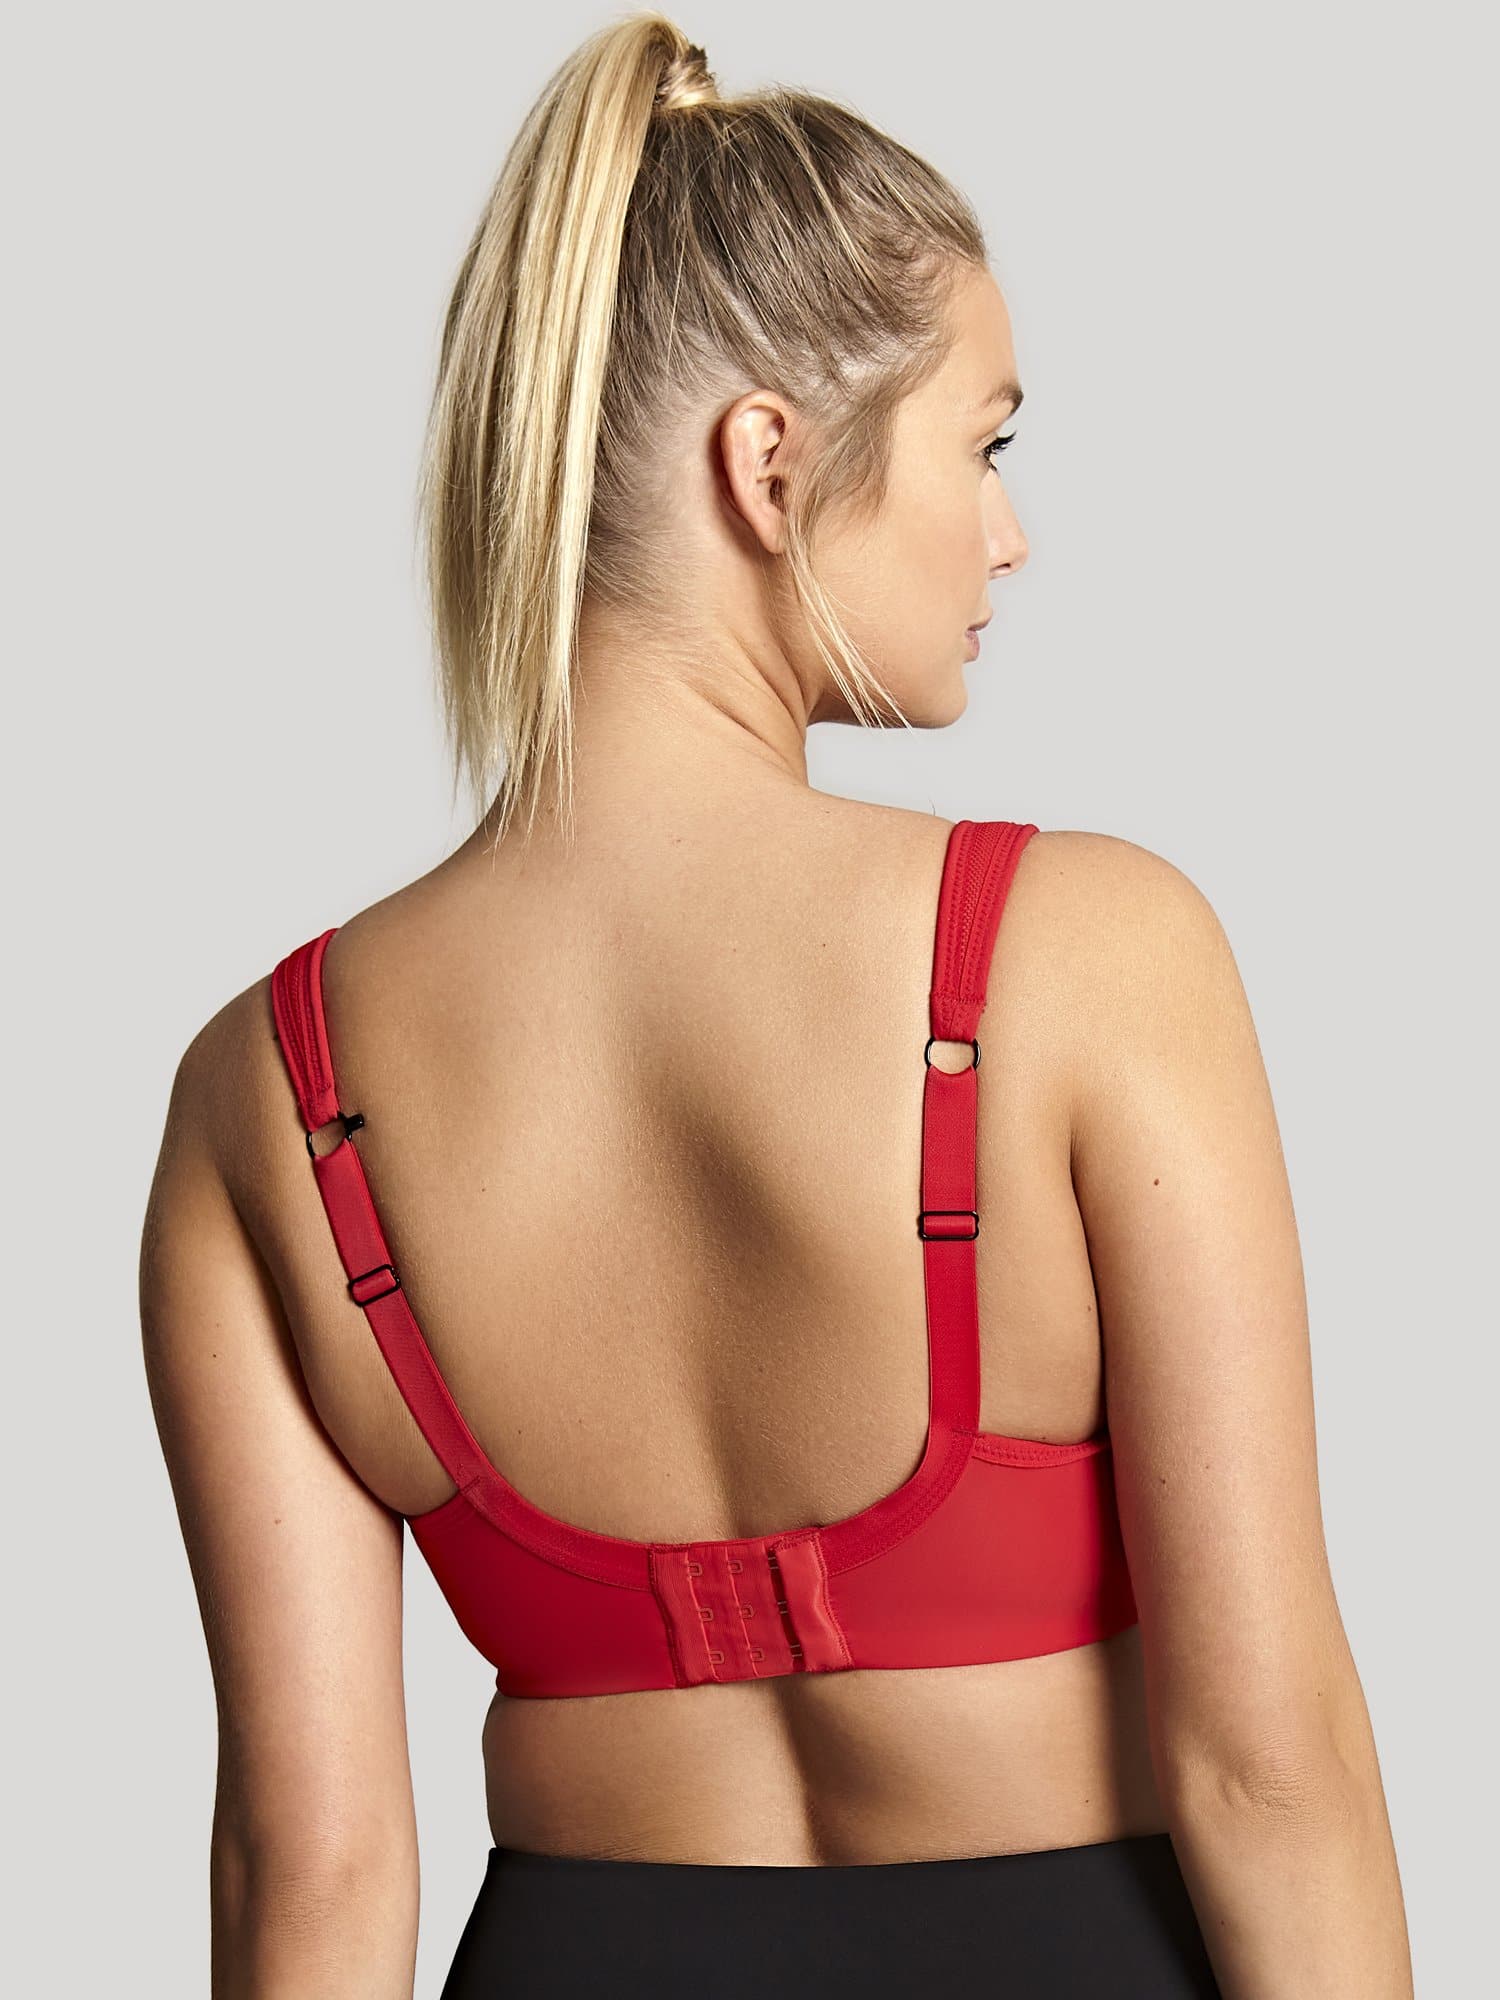 Panache Wired Sports Bra in Fiery Red, worn by model in back view product image.Panache Wired Sports Bra - Fiery Red worn by model back view